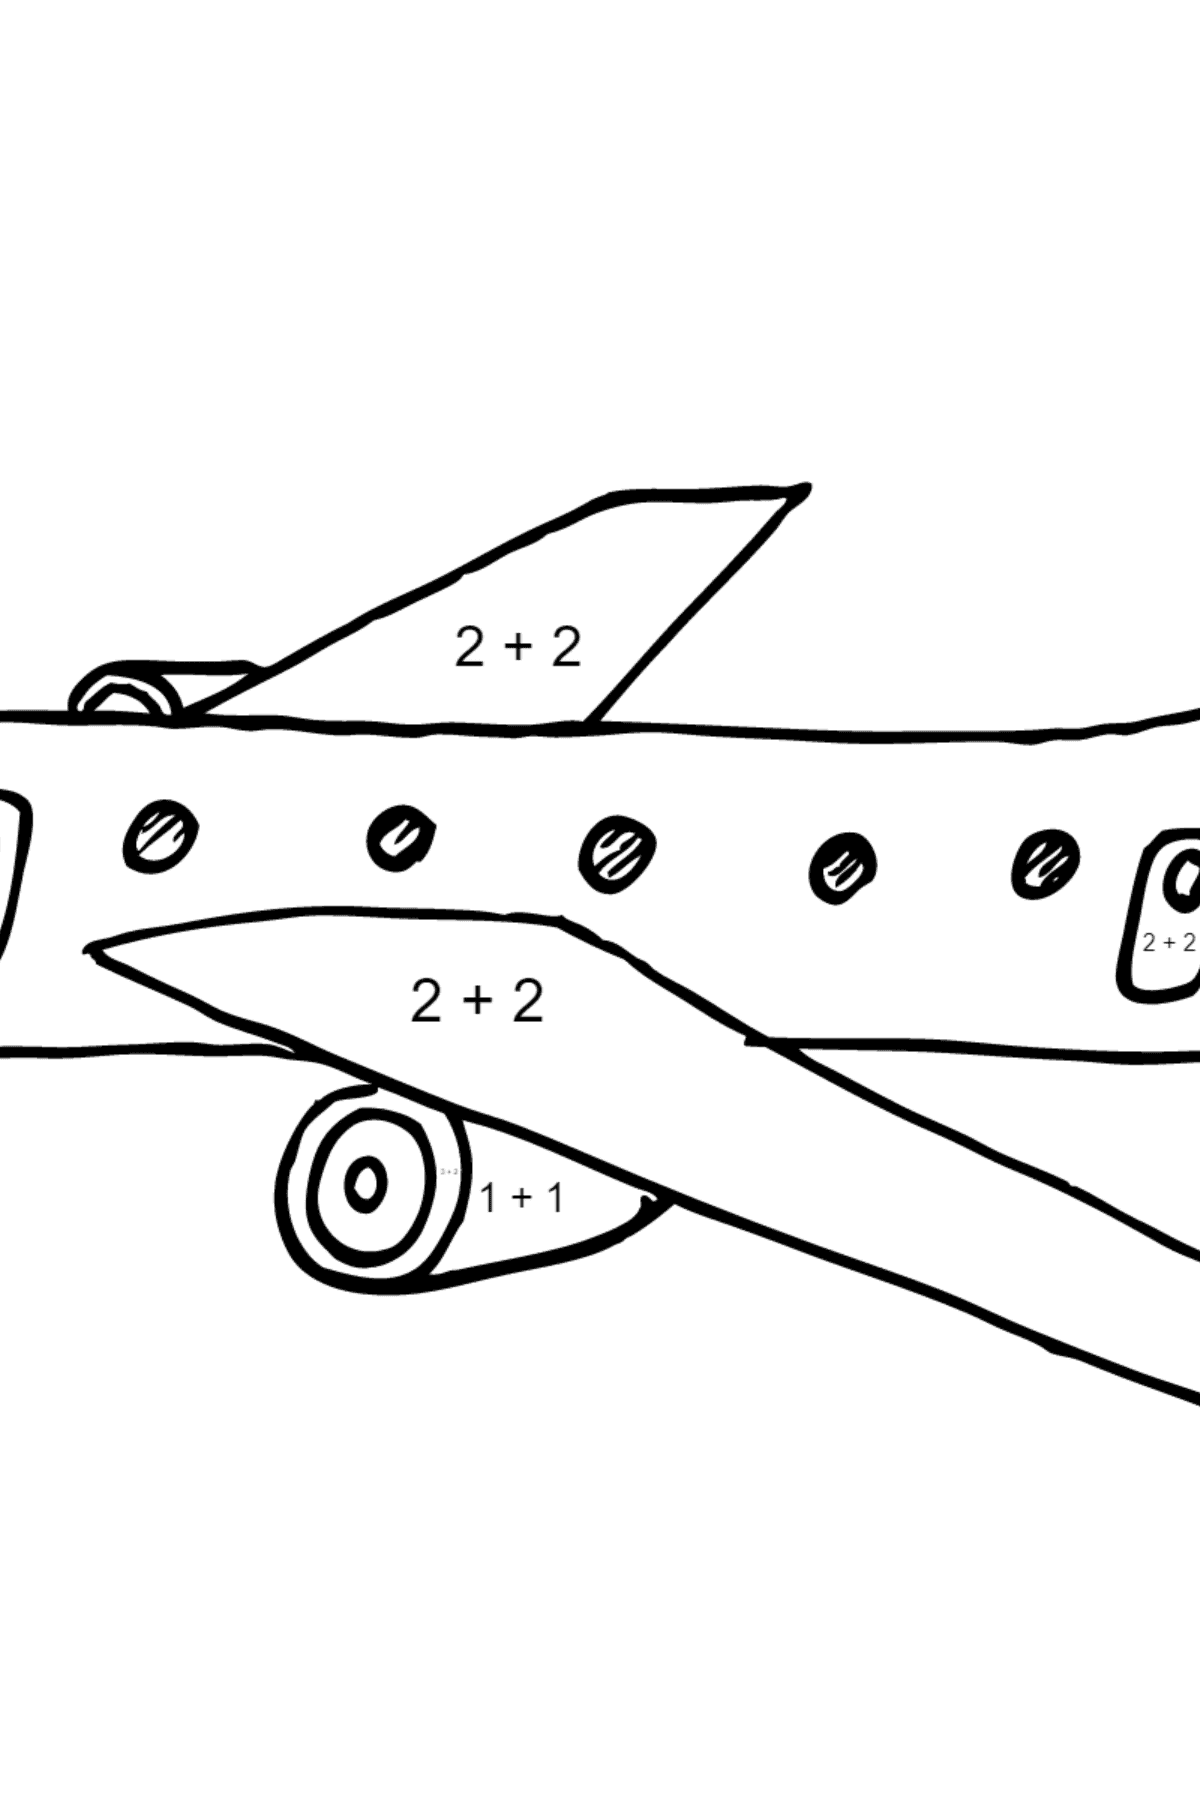 Coloring Page - A Commercial Jet - Math Coloring - Addition for Children